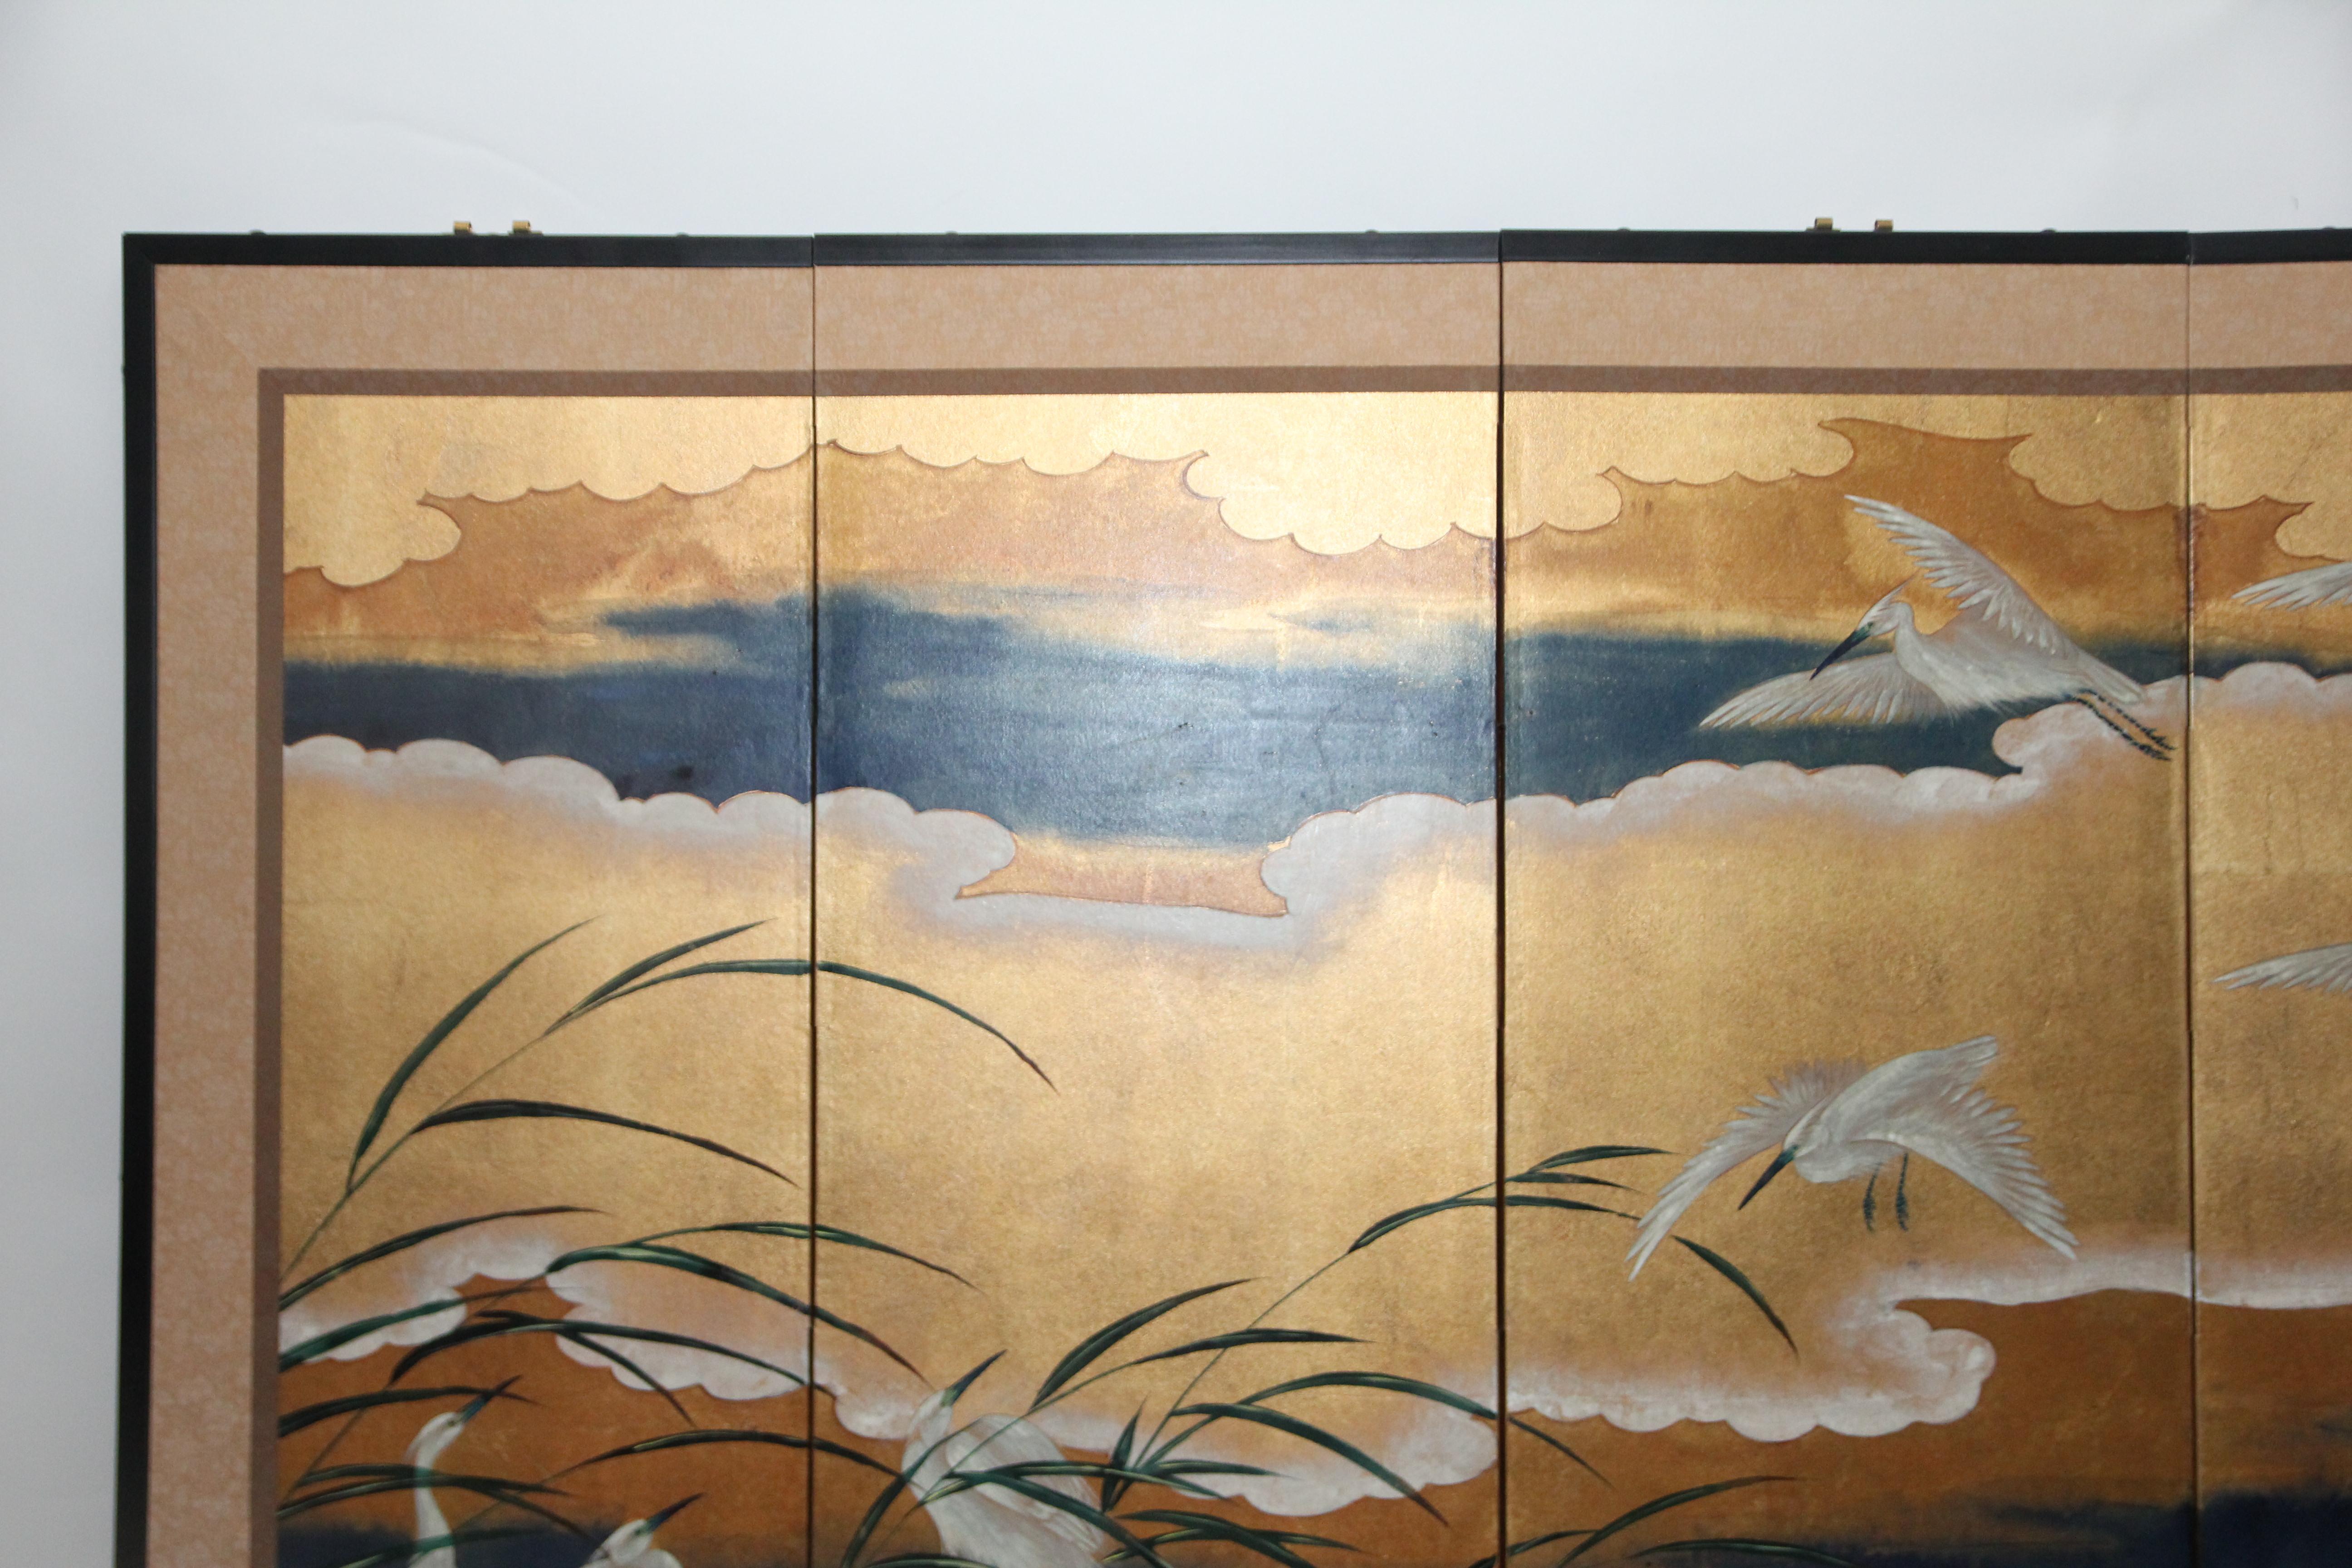 The flying cranes painting of this six-panel screen is hand-painted in watercolor, on squares of gold leaf which are applied by hand to the paper base over carefully jointed wooden lattice frames. Lacquer rails are then applied to the perimeter to